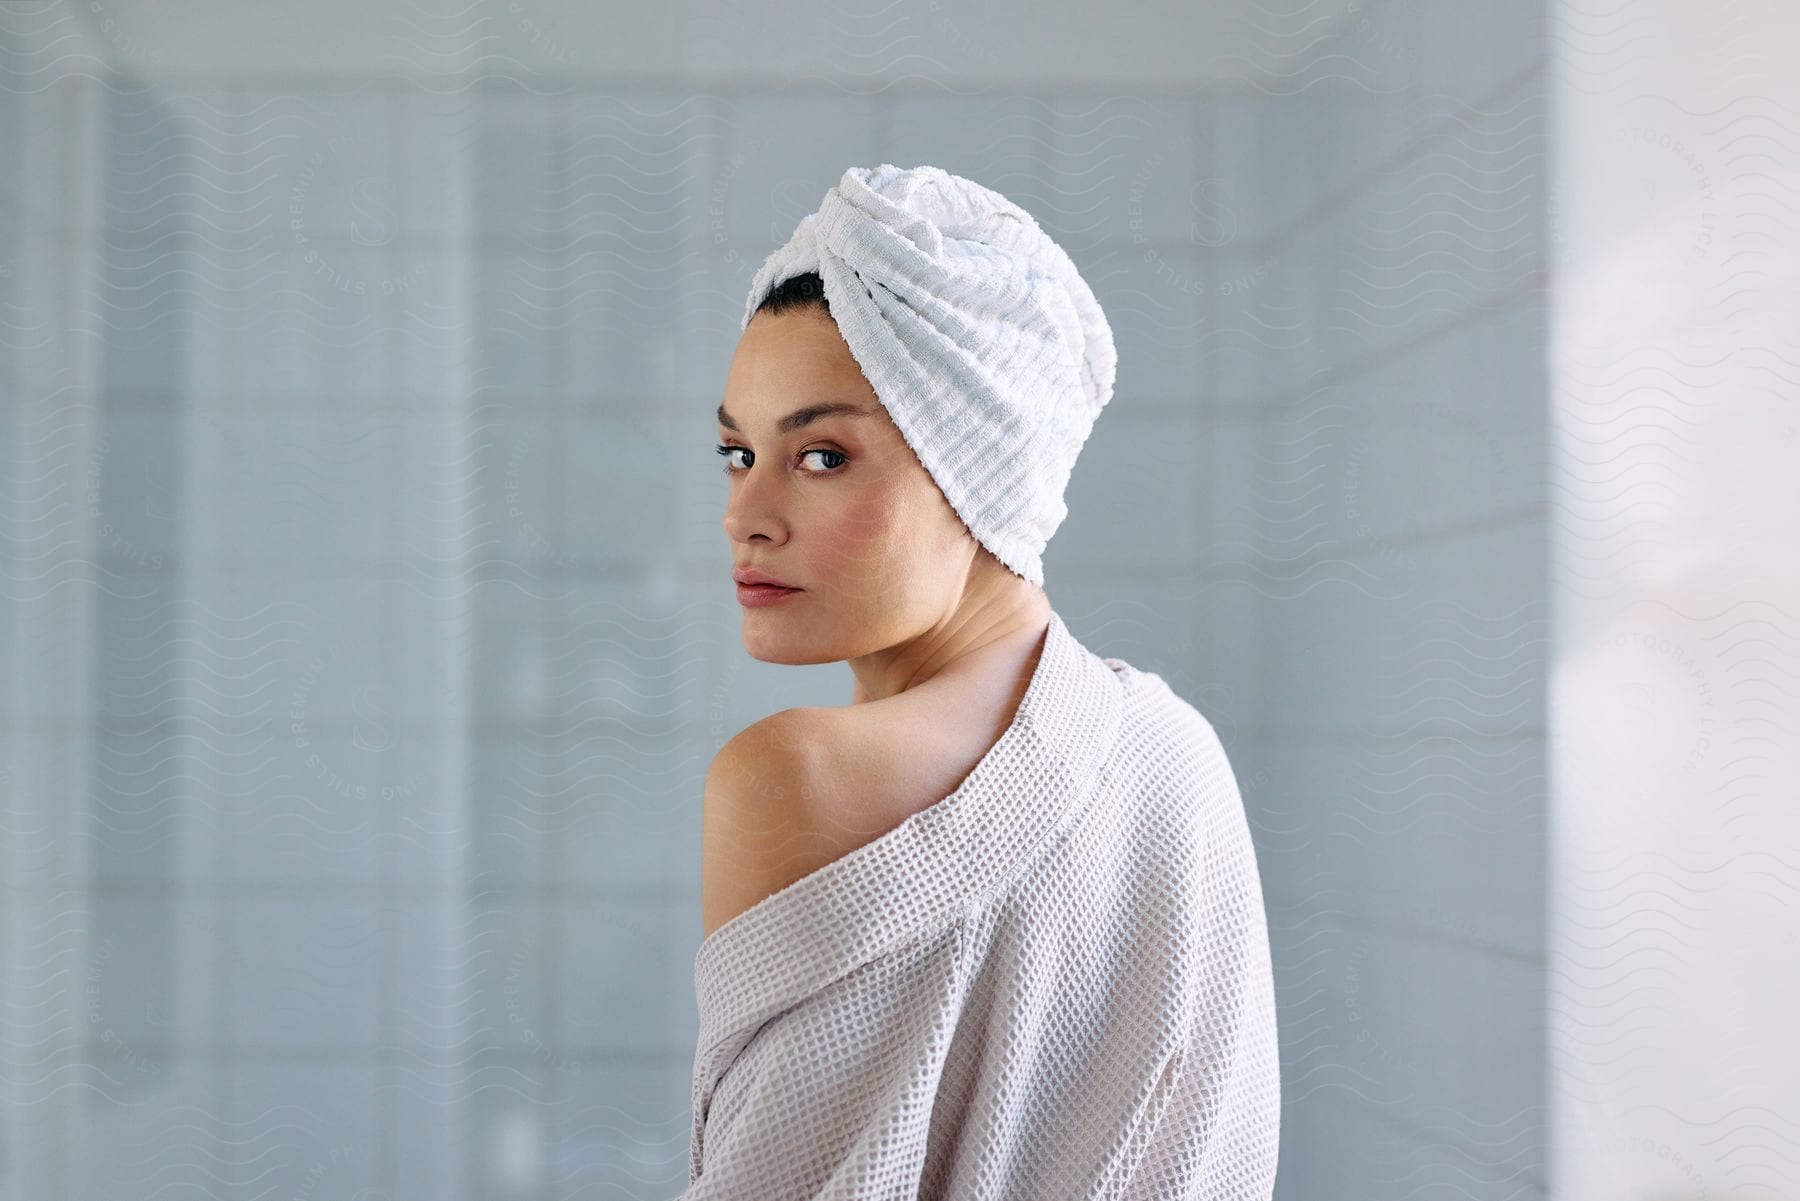 Woman wearing turban and robe looks over her shoulder while standing in the bathroom.